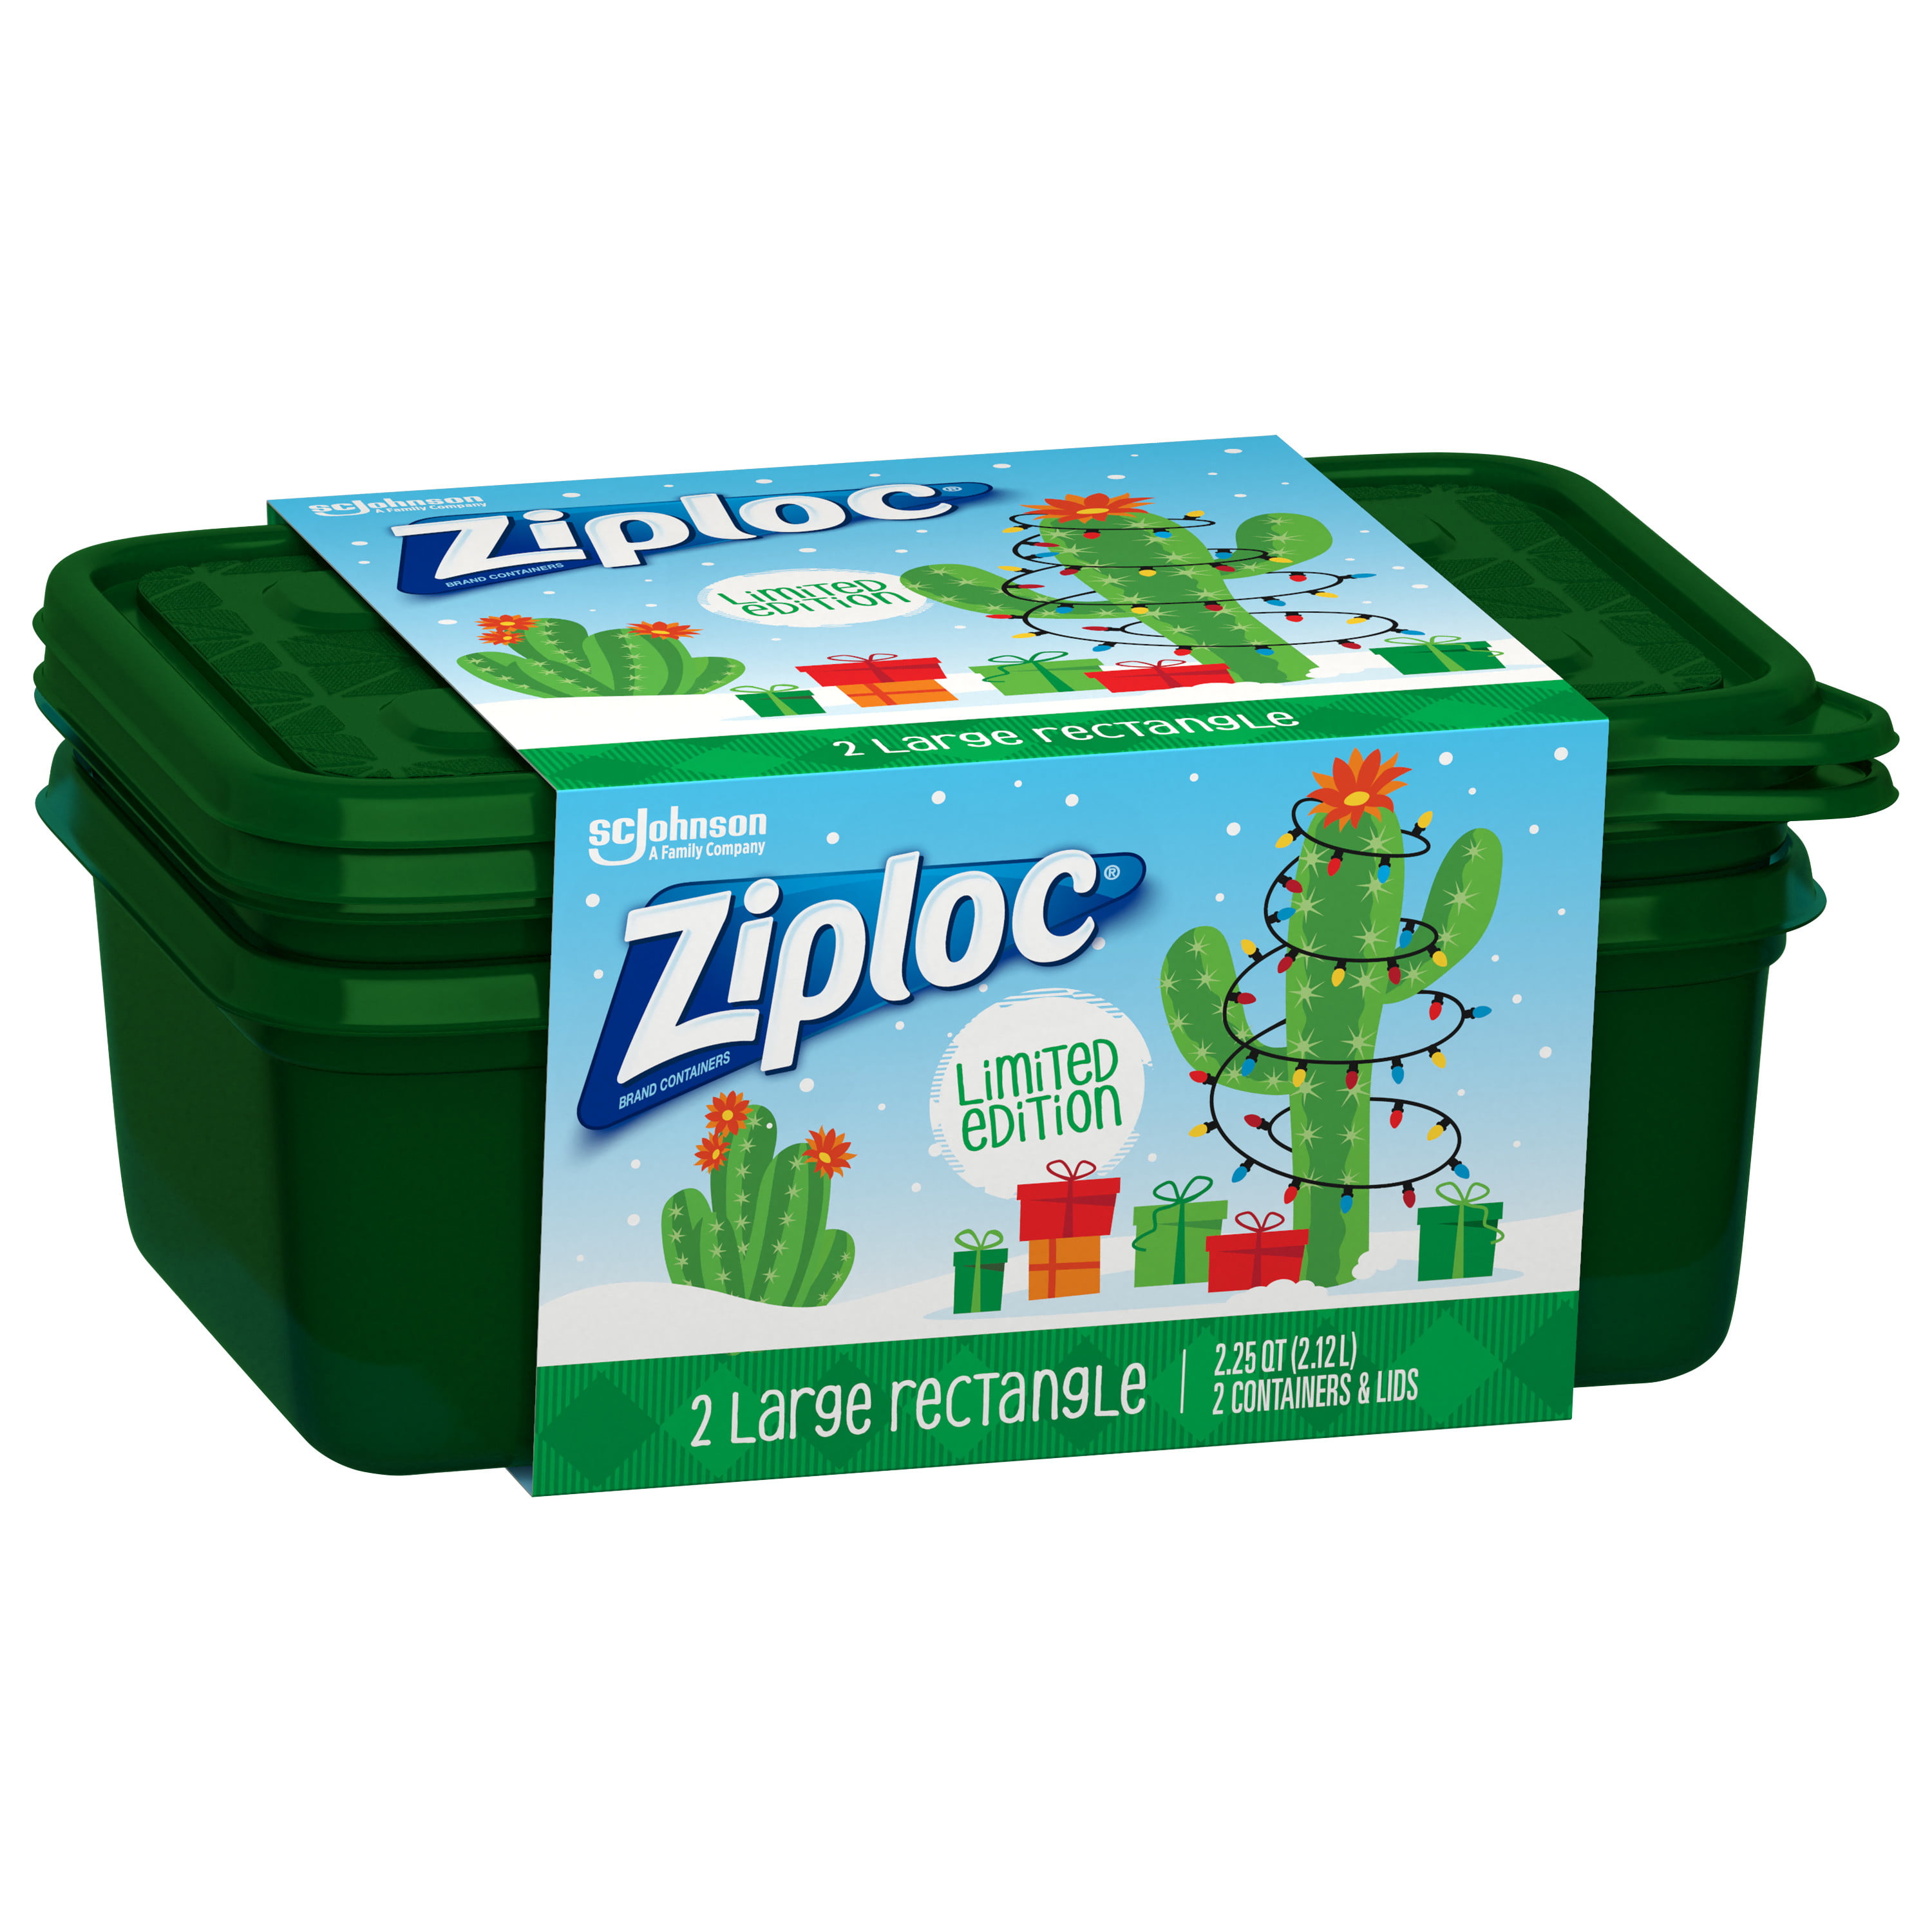 Ziploc Container Large Rectangle  The Loaded Kitchen Anna Maria